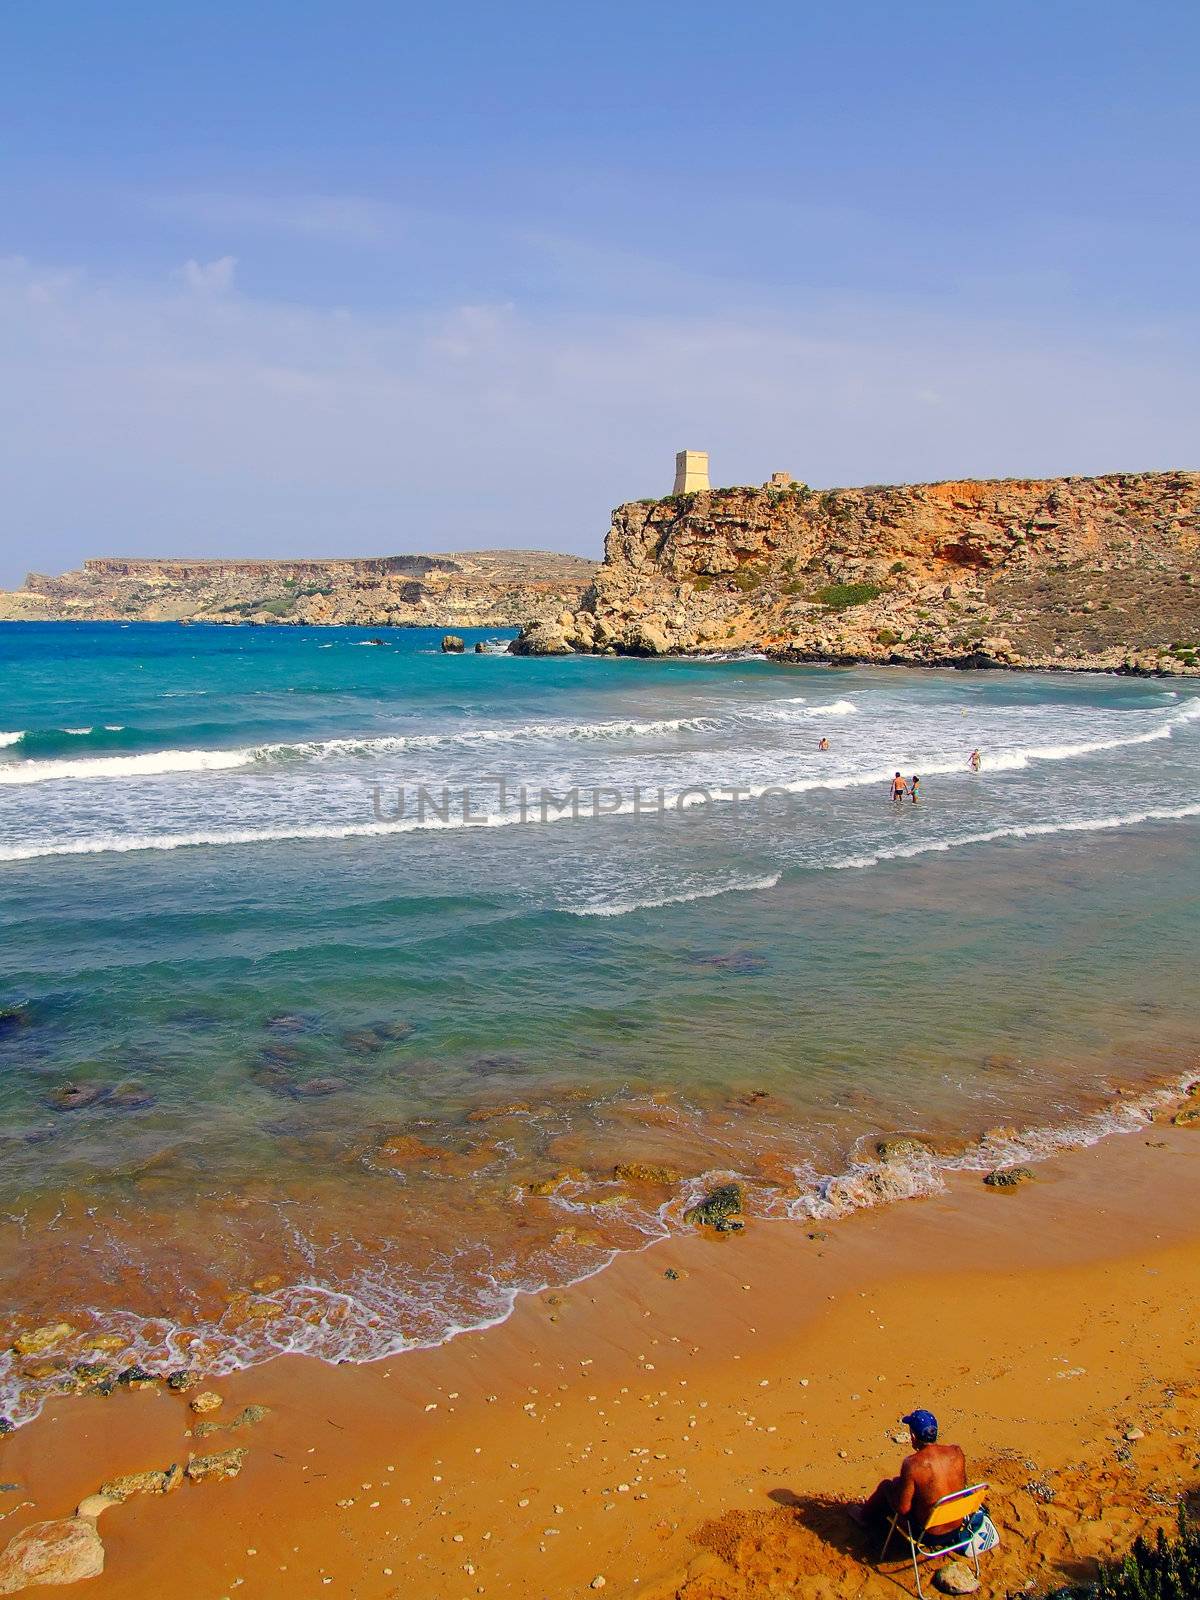 Lone man sitting near the clear blue Mediterranean waters on windy day, with beach and typical rocky coastline